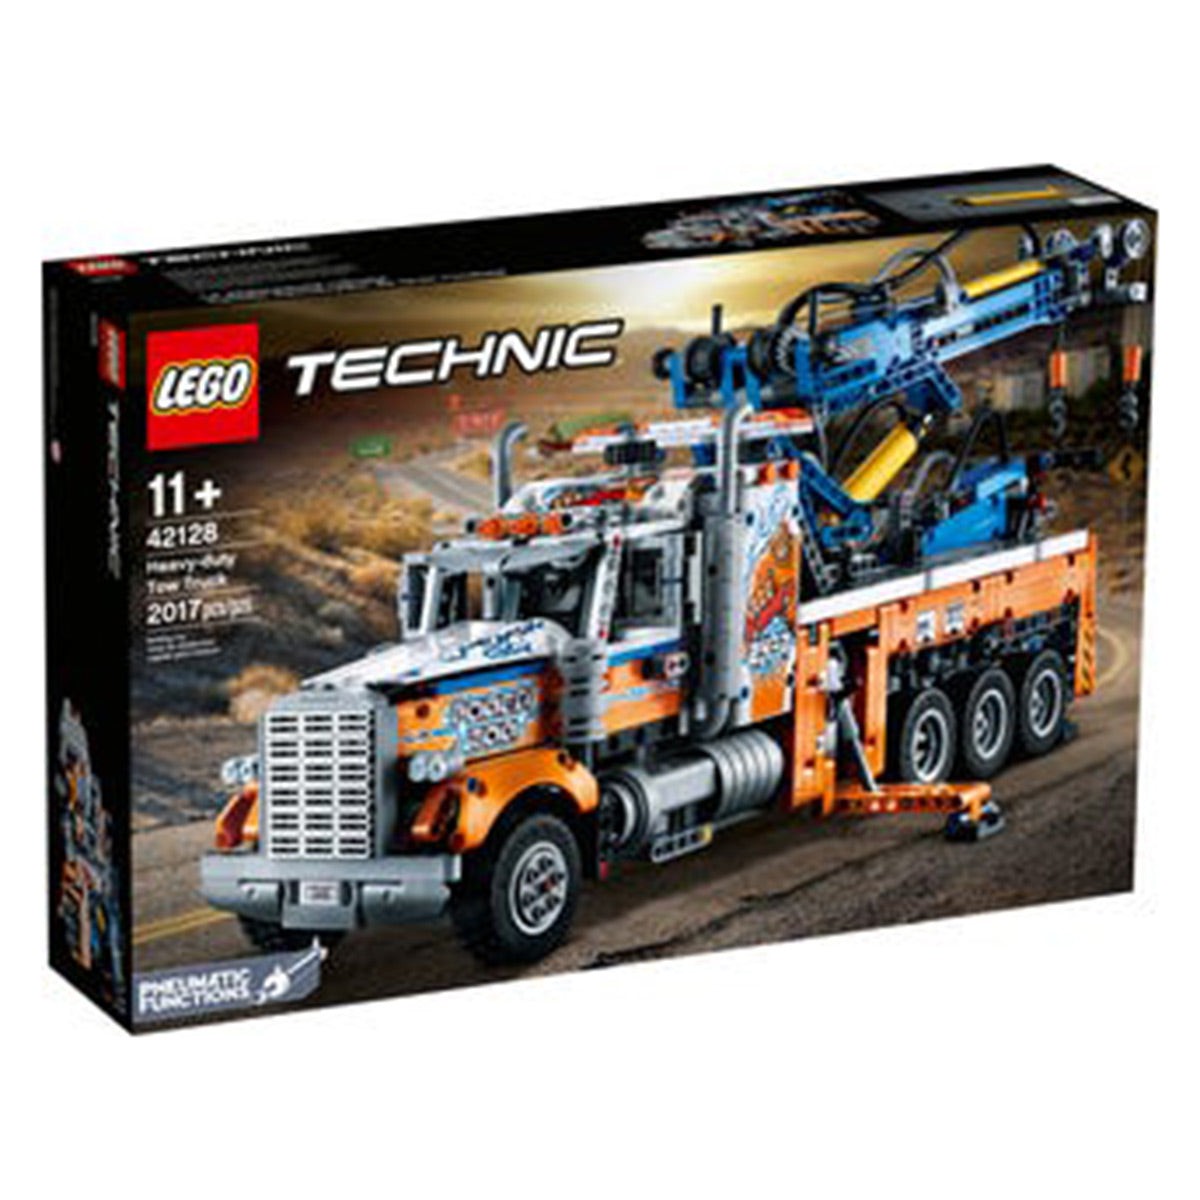 LEGO Toys & Games LEGO Technic Heavy-Duty Tow Truck, 42128, Ages 11+, 2017 Pieces 673419340076